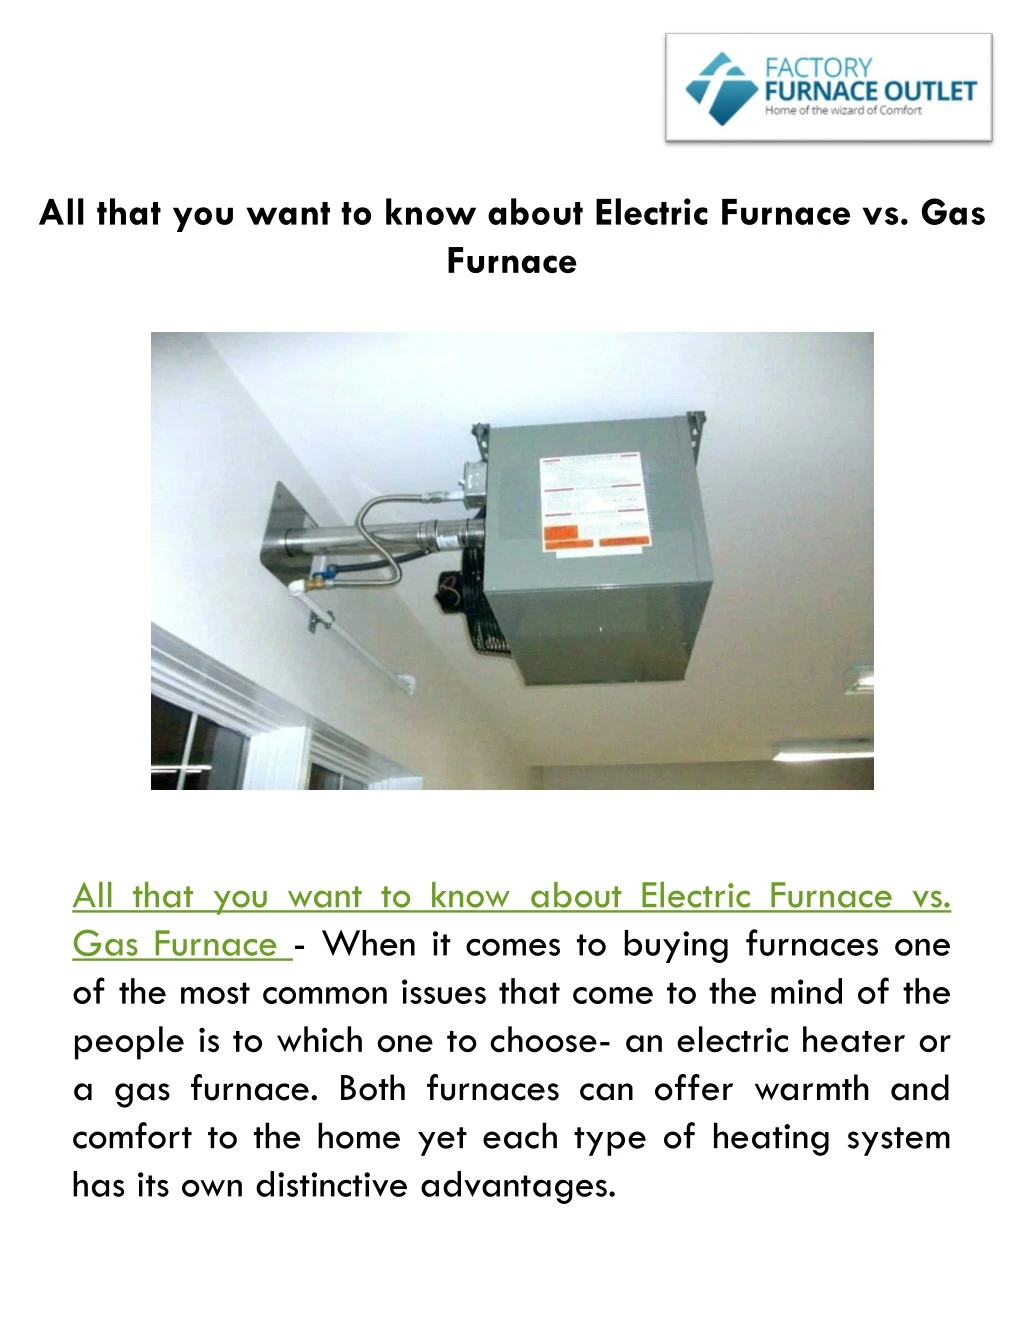 all that you want to know about electric furnace